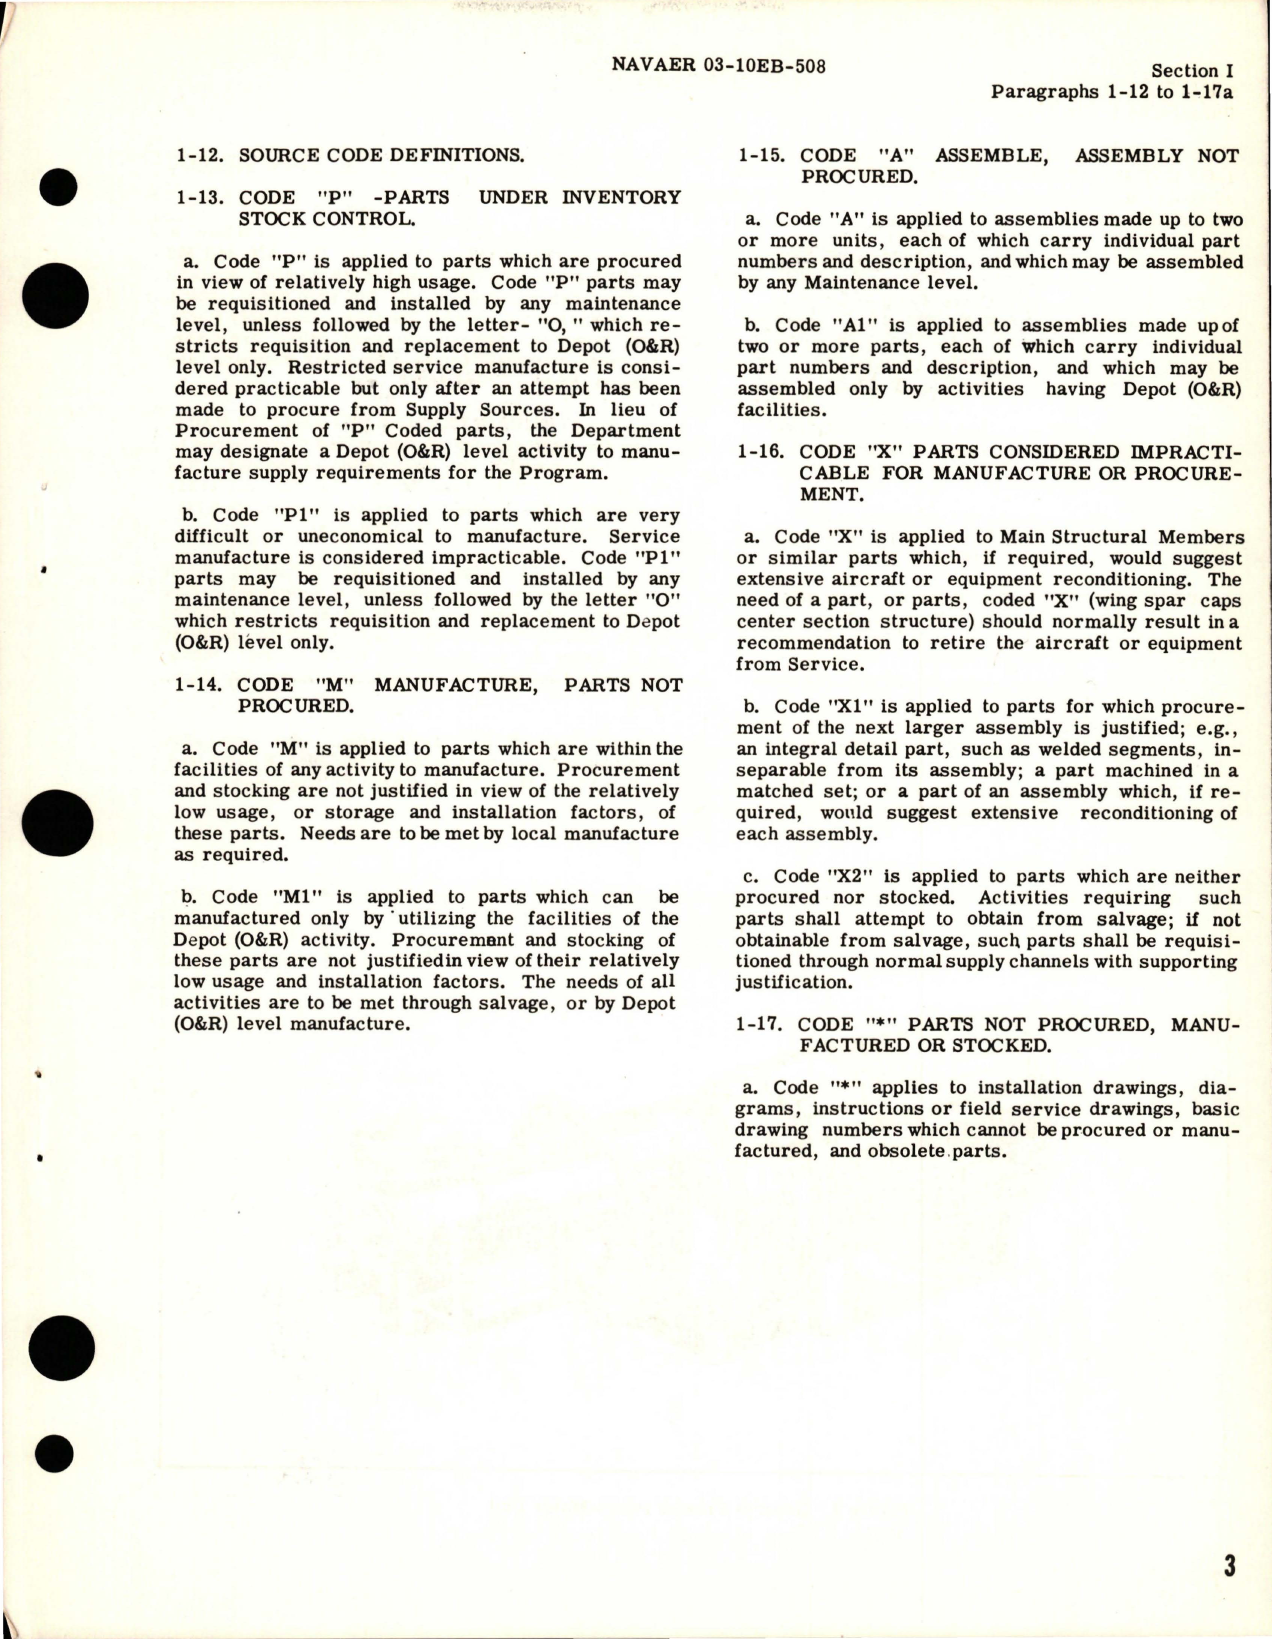 Sample page 5 from AirCorps Library document: Illustrated Parts Breakdown for Fuel Filter De-Icing Alcohol Pump - Model RG-5490-E